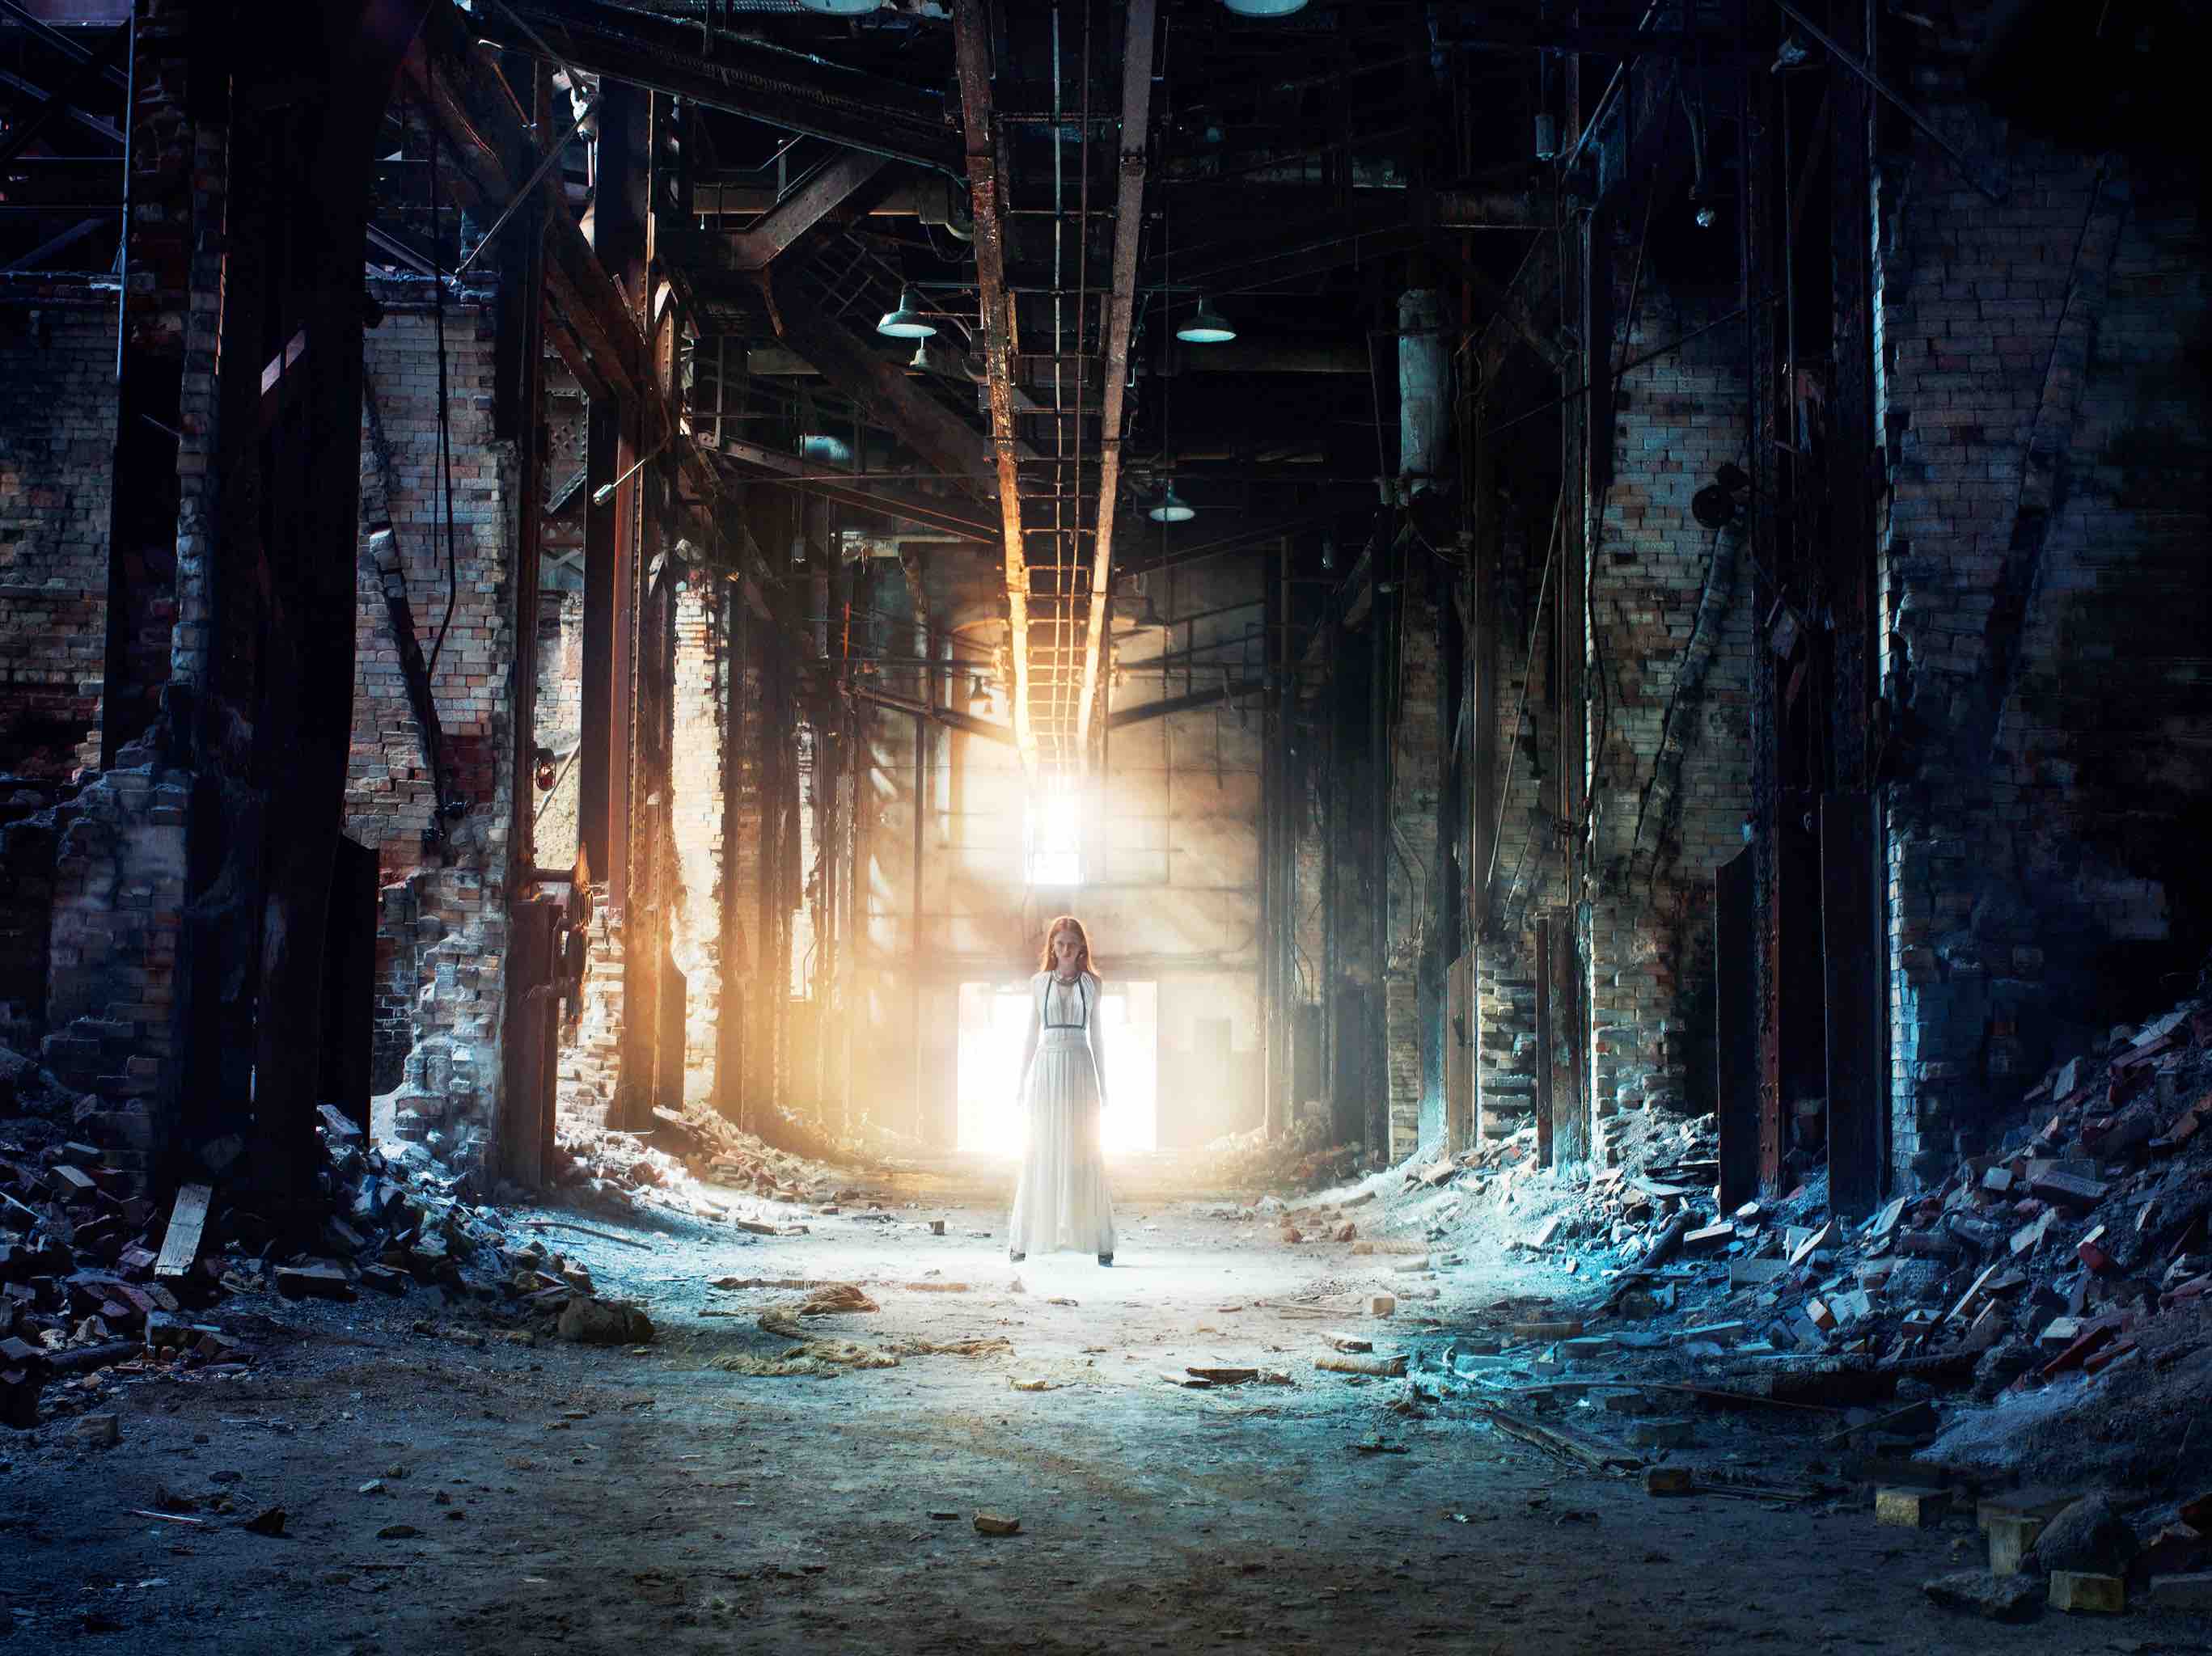 Epson campaign in New York, 2007, lighting up a decaying factory building with several 6400ws Broncolor twin heads, placed some 60 feet behind model. (photo by Markus Klinko)